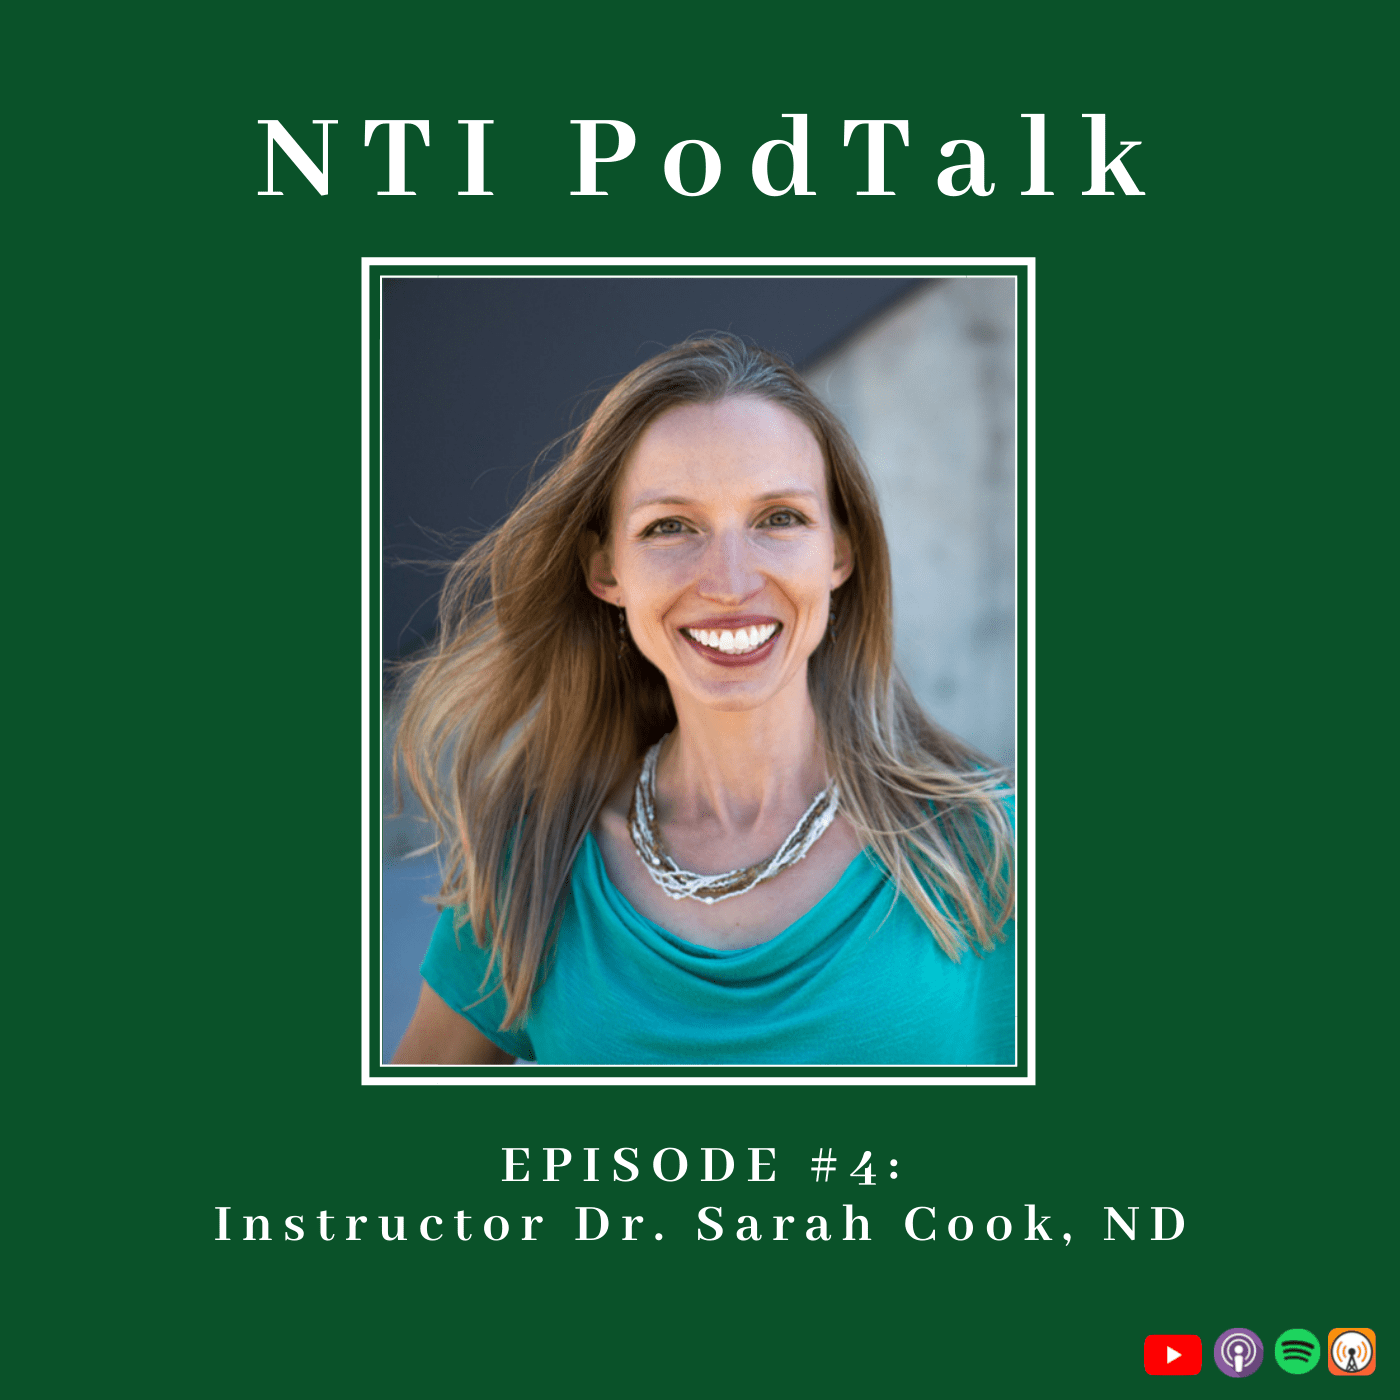 Featured image for “NTI PodTalk with Instructor Dr. Sarah Cook”